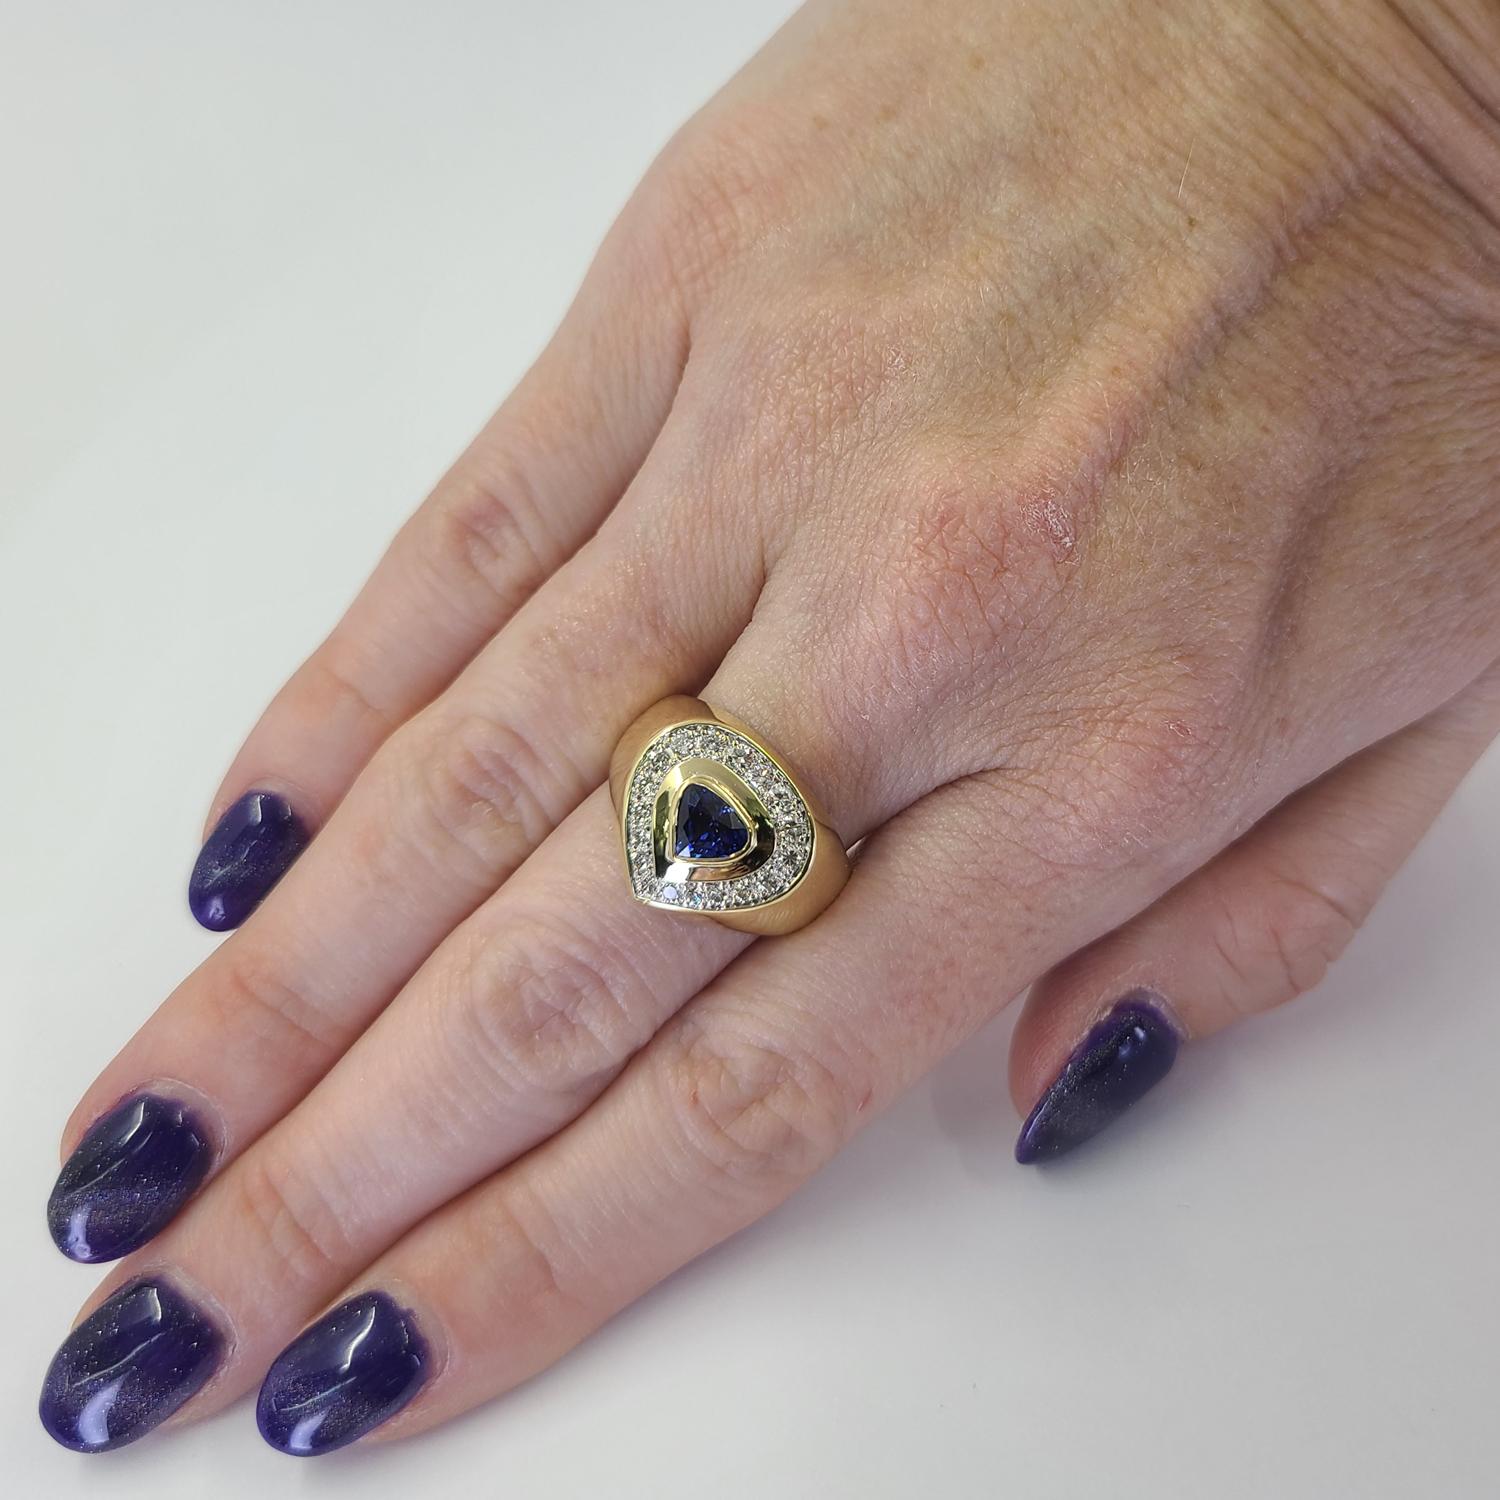 18 Karat Yellow Gold Ring Featuring A Bezel Set Pear Shaped Sapphire Weighing Approximately 0.50 Carats Accented By 18 Round Brilliant Cut Diamonds of VS Clarity and H Color Totaling An Additional 0.50 Carats. Finger Size 8; Purchase Includes One